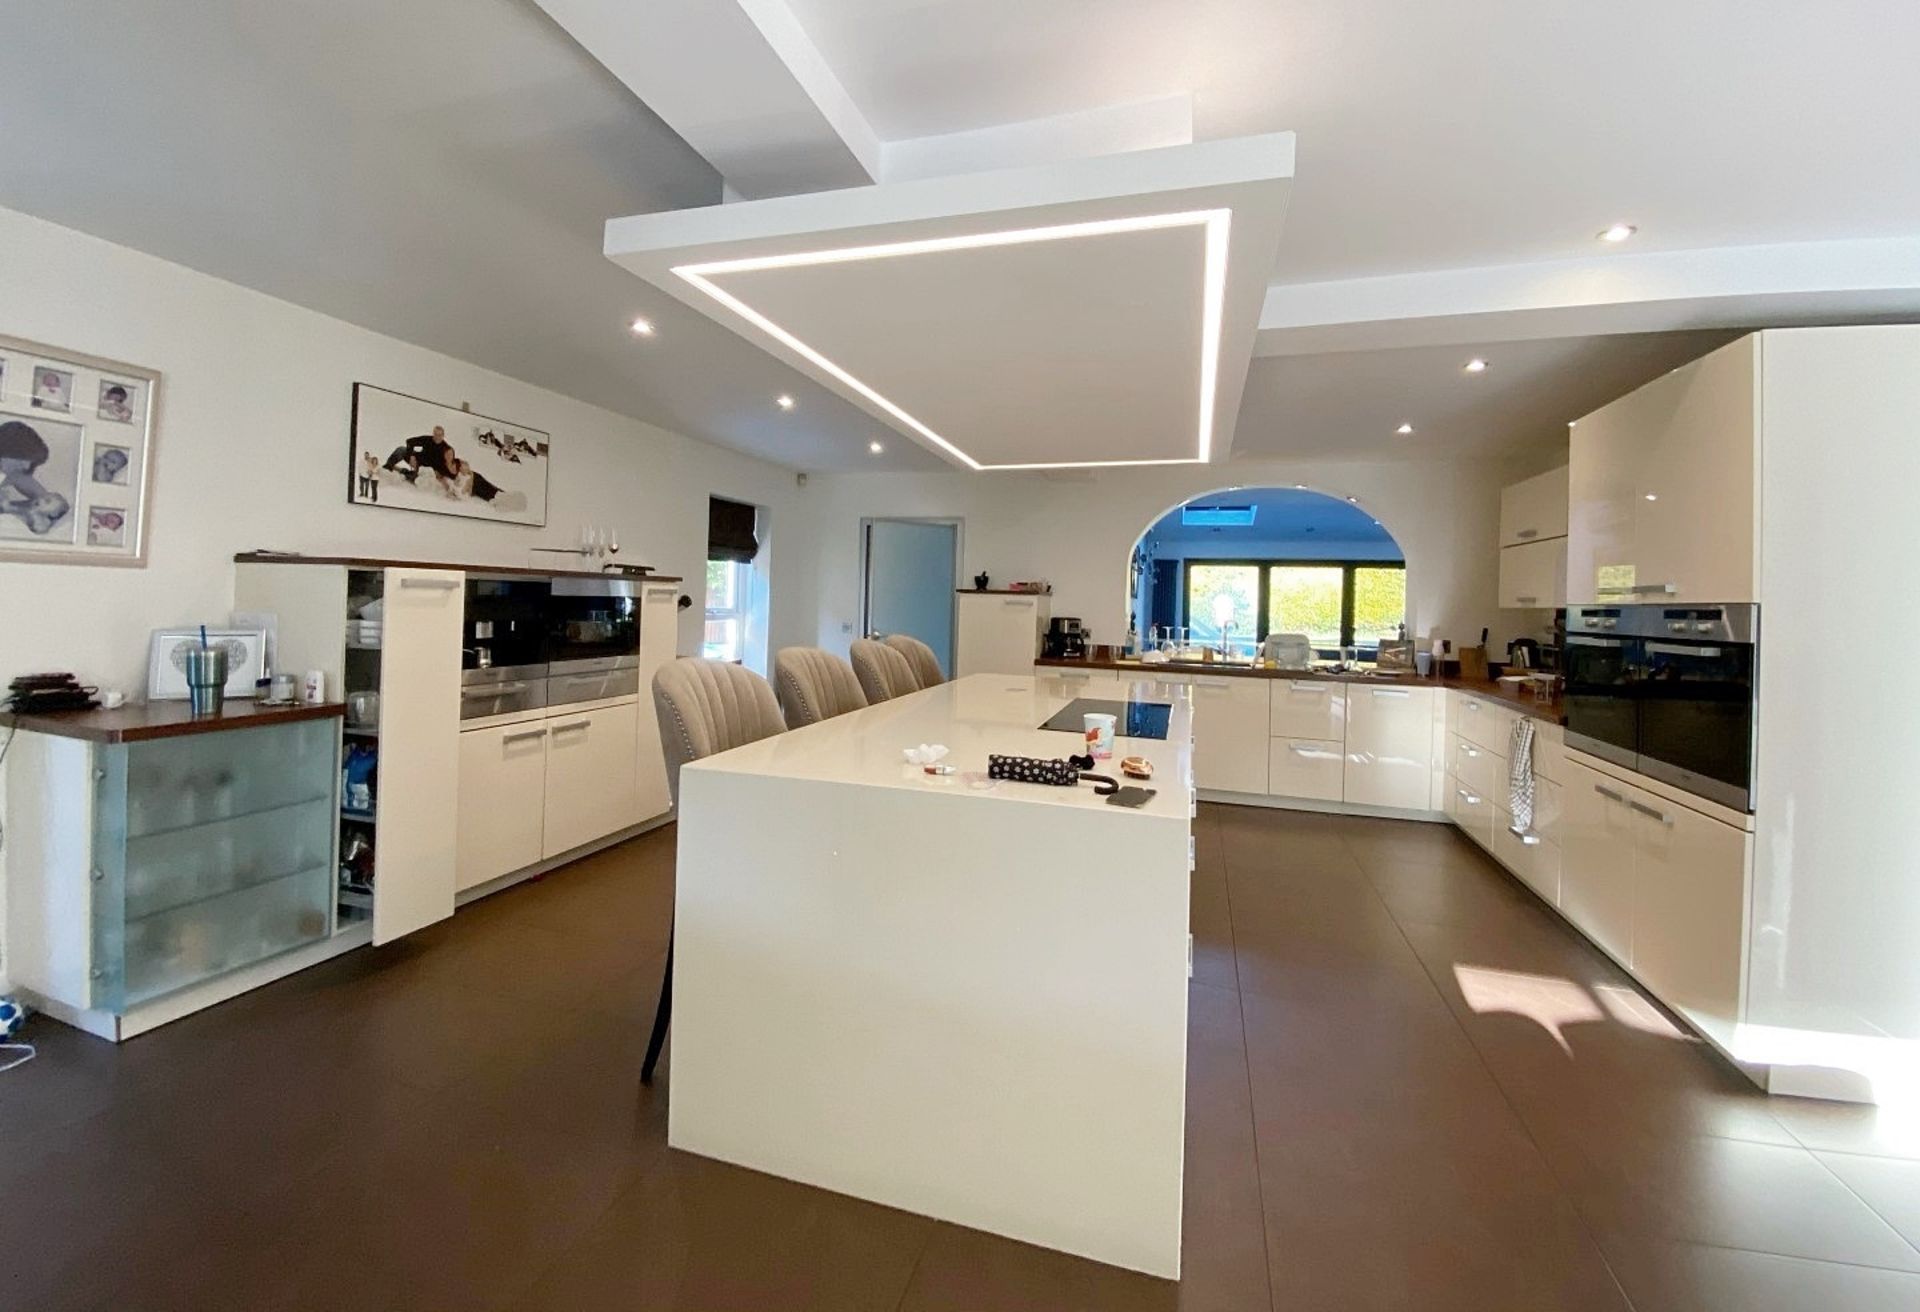 1 x Bespoke Luxury ALNO Branded Fitted Kitchen With Miele Appliances And Silestone® Central Island